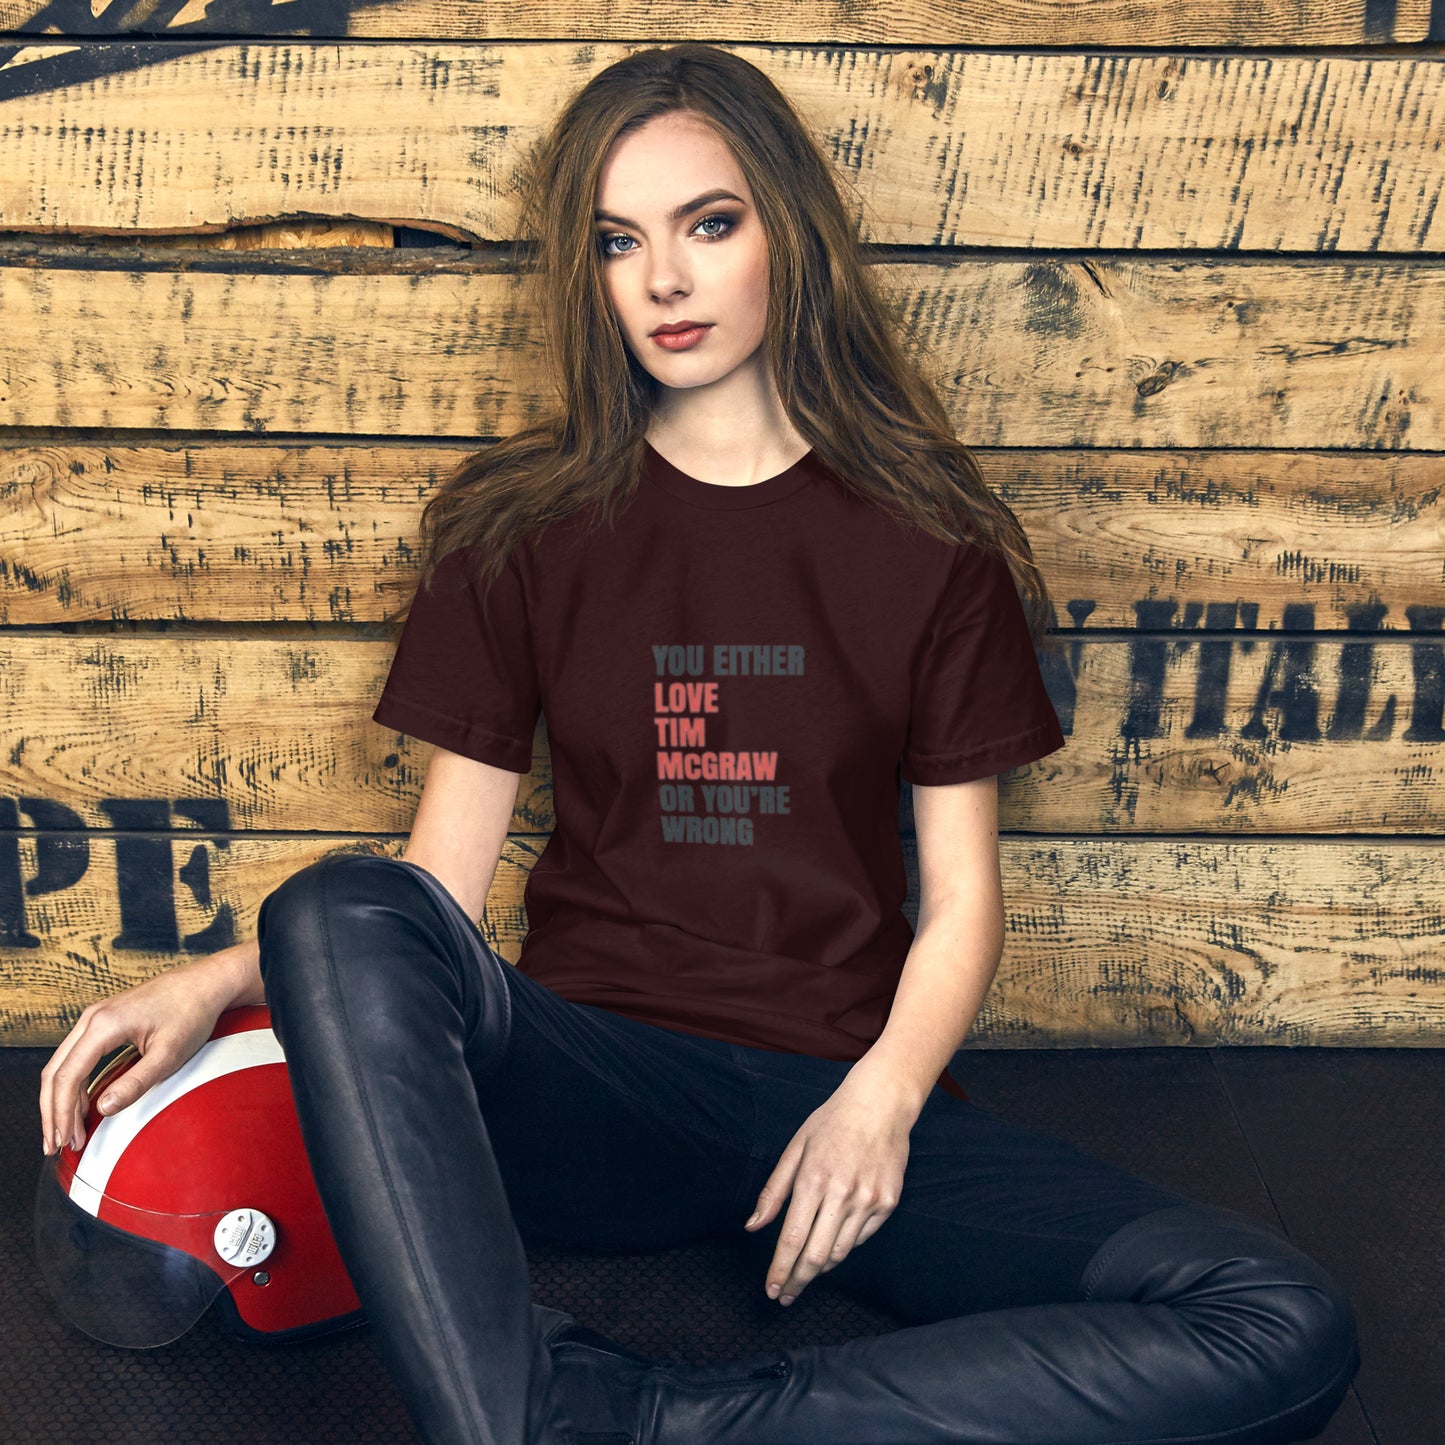 Love Tim - Classic Country Tees